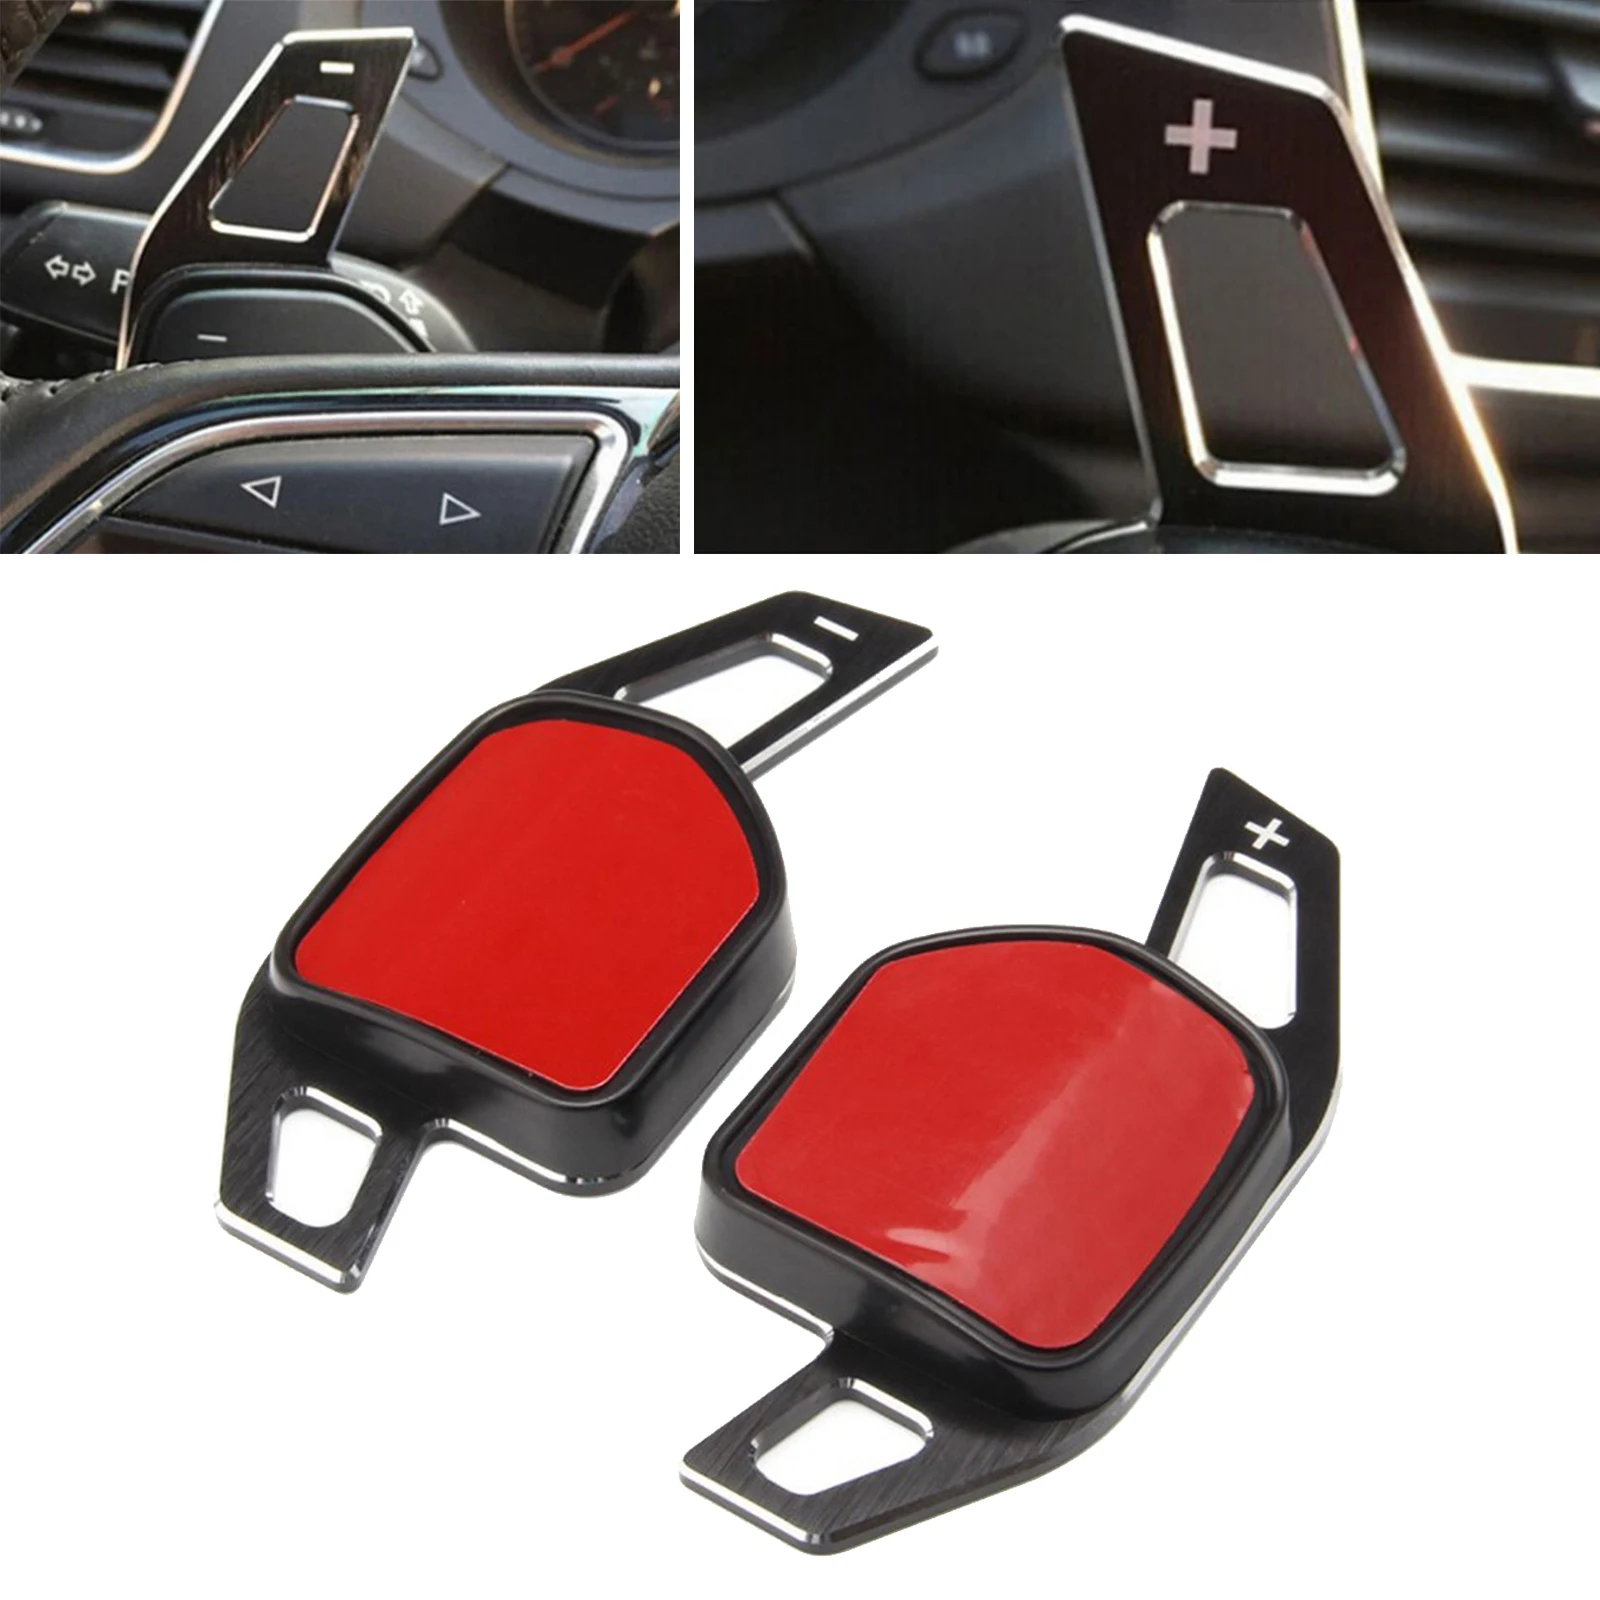 2x Steering Wheel Paddle Shift Extensions for Audi TT/ TTS(2007-2011), R8(2009-2011), A1(2010-2011)